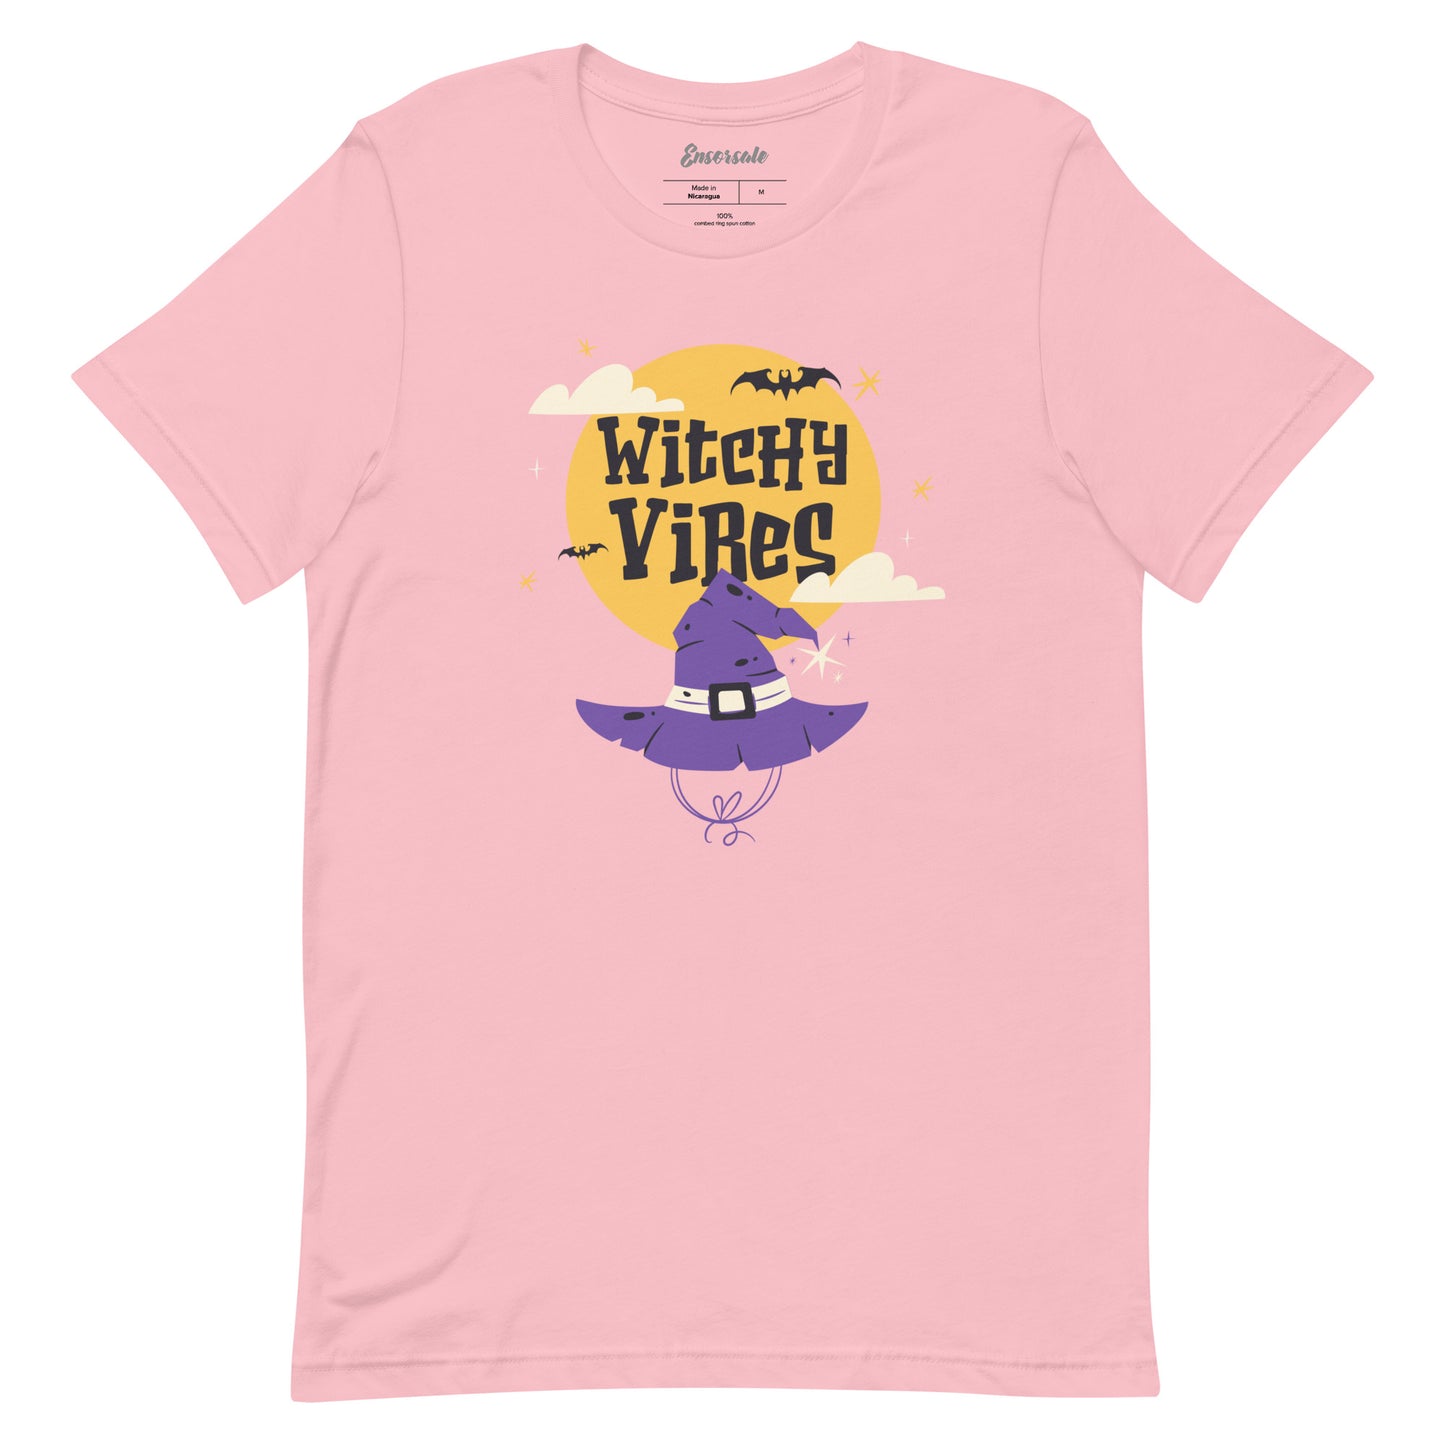 Witchy Vibes t-shirt